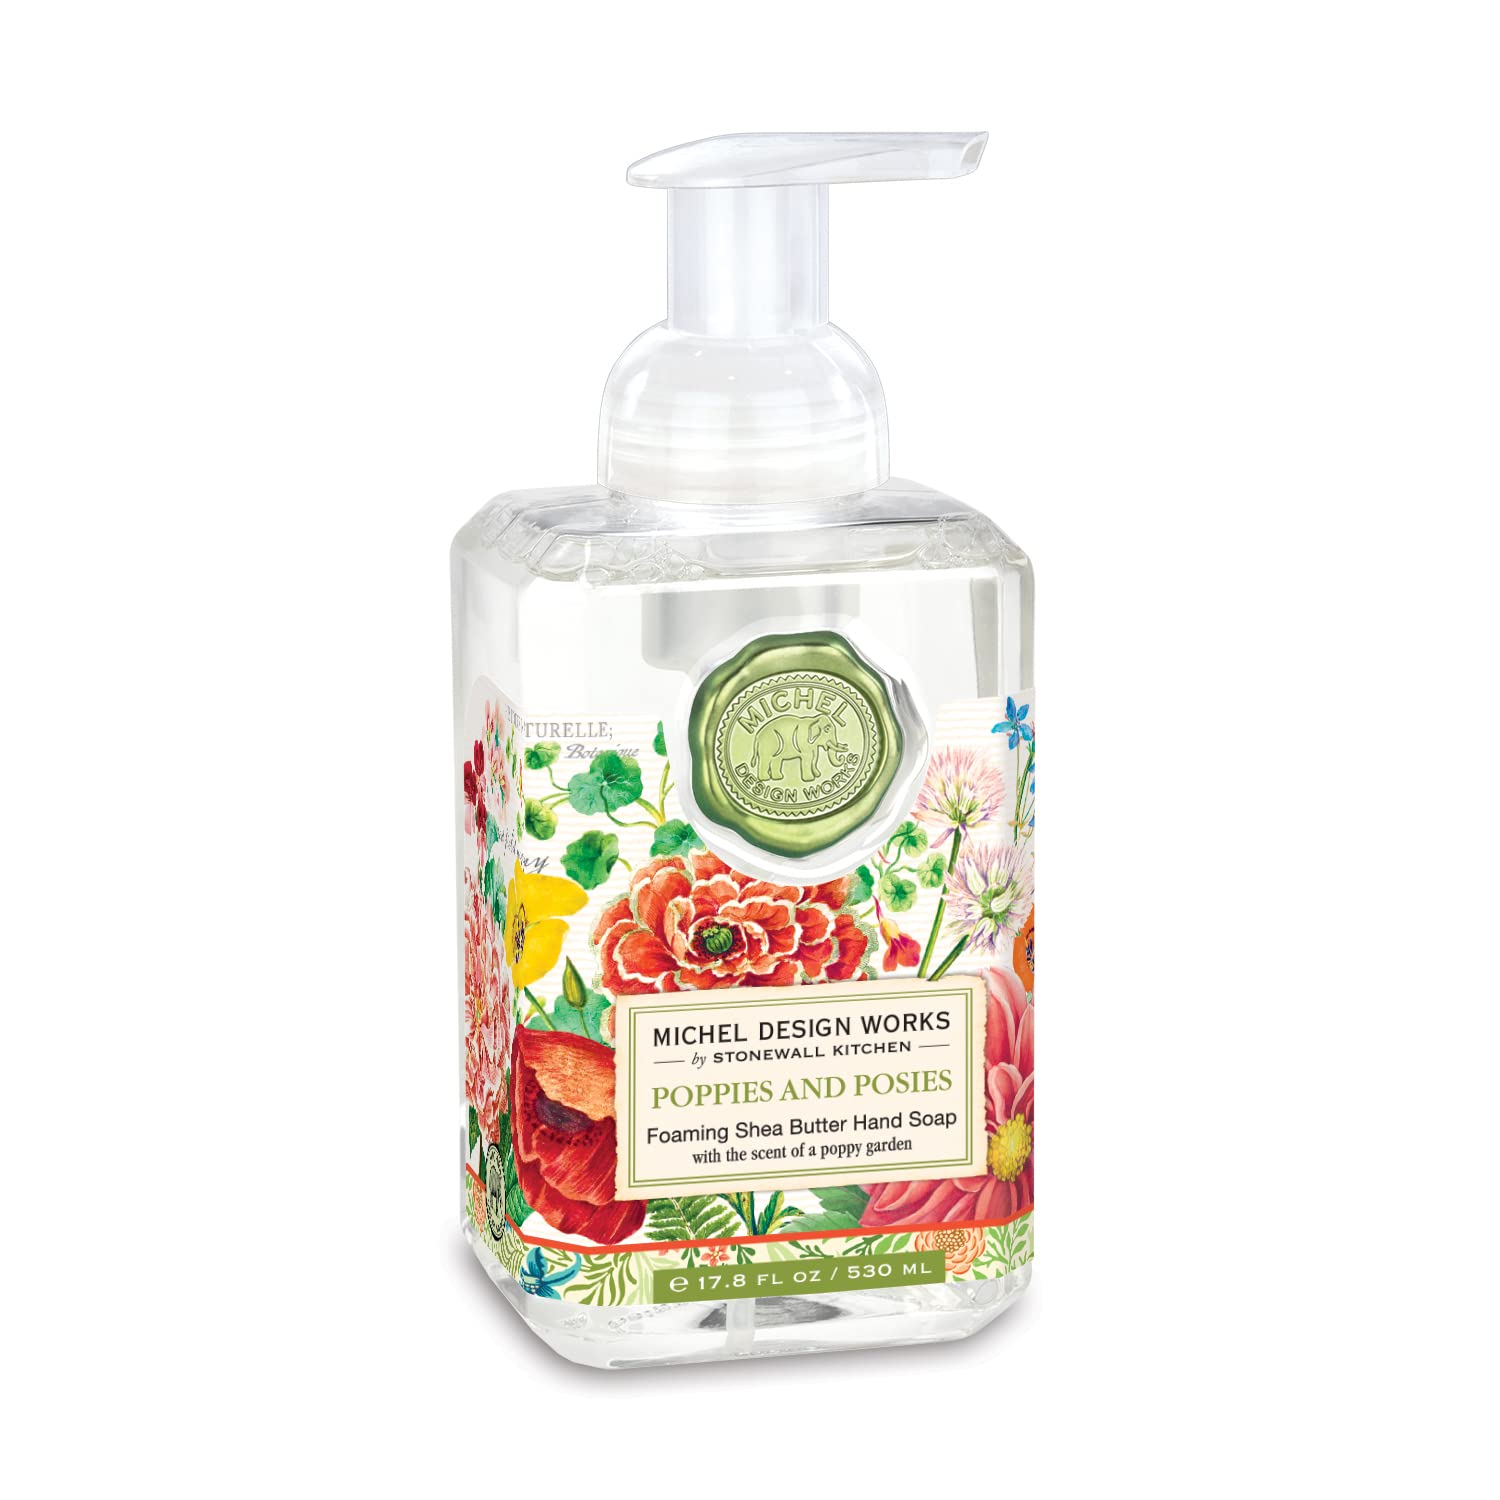 Michel Design Works Foaming Hand Soap, p 0 ppies and Posies